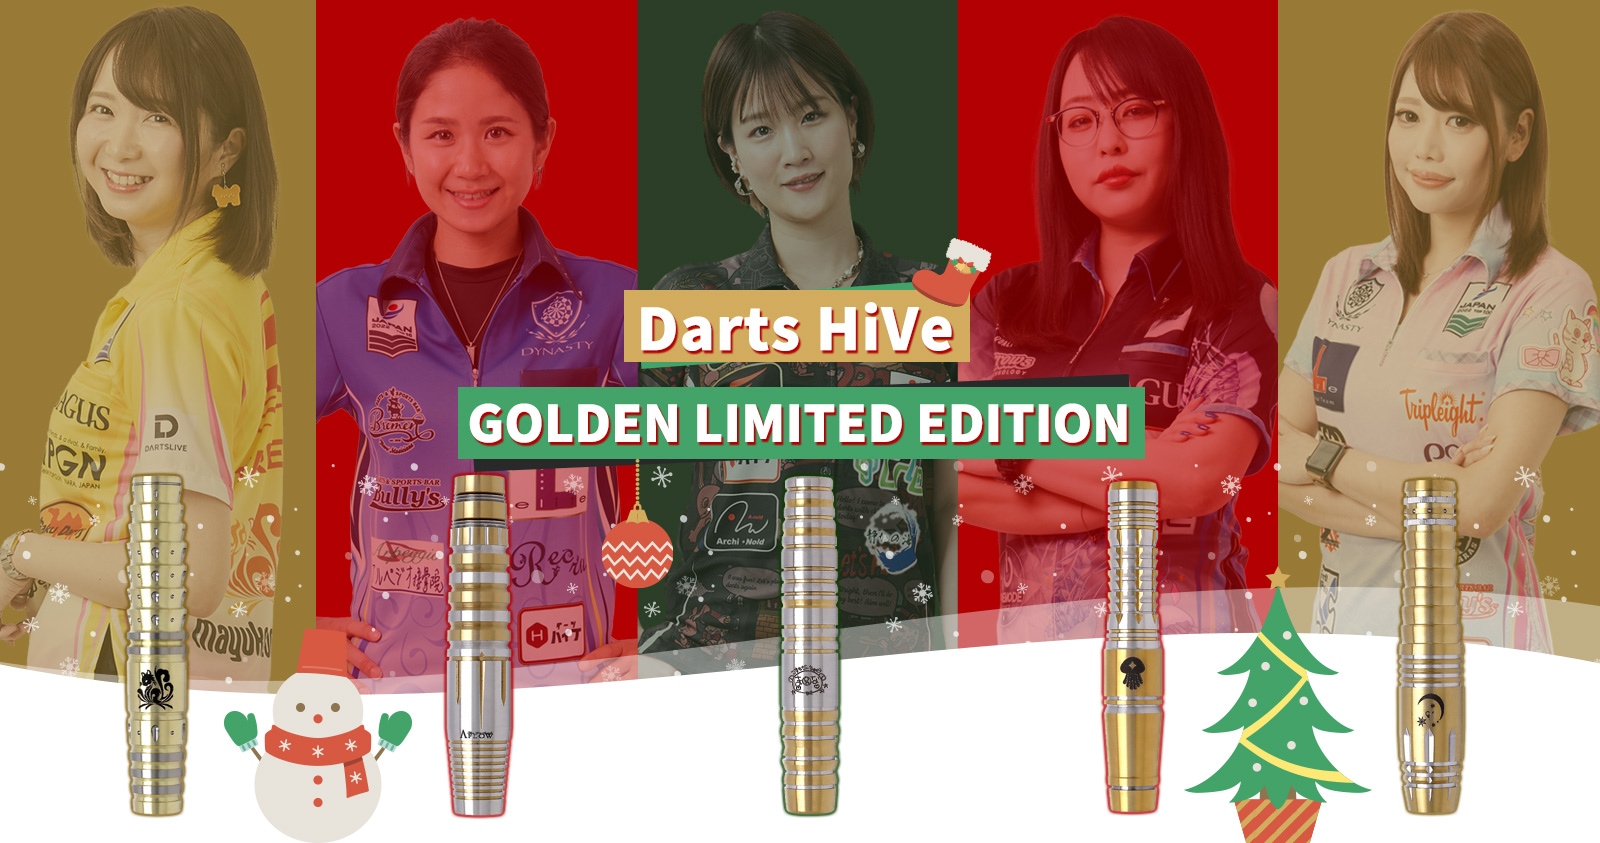 Darts HiVe GOLDEN LIMITED EDTION